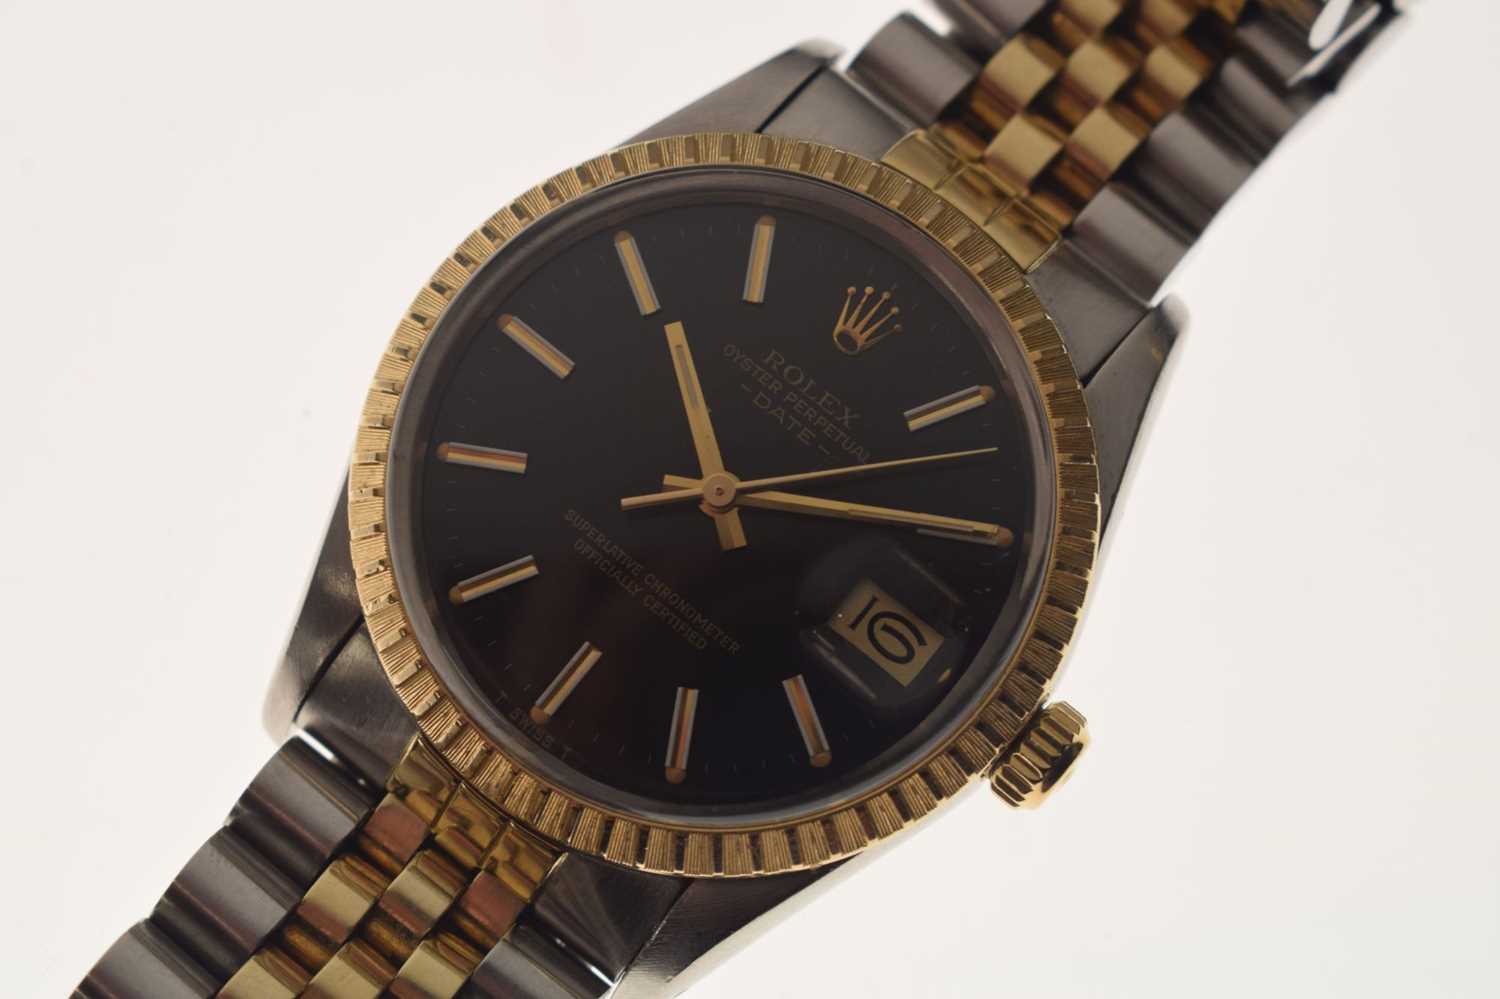 Rolex - Early 1980s Datejust Oyster Perpetual Superlative Chronometer - Image 4 of 16